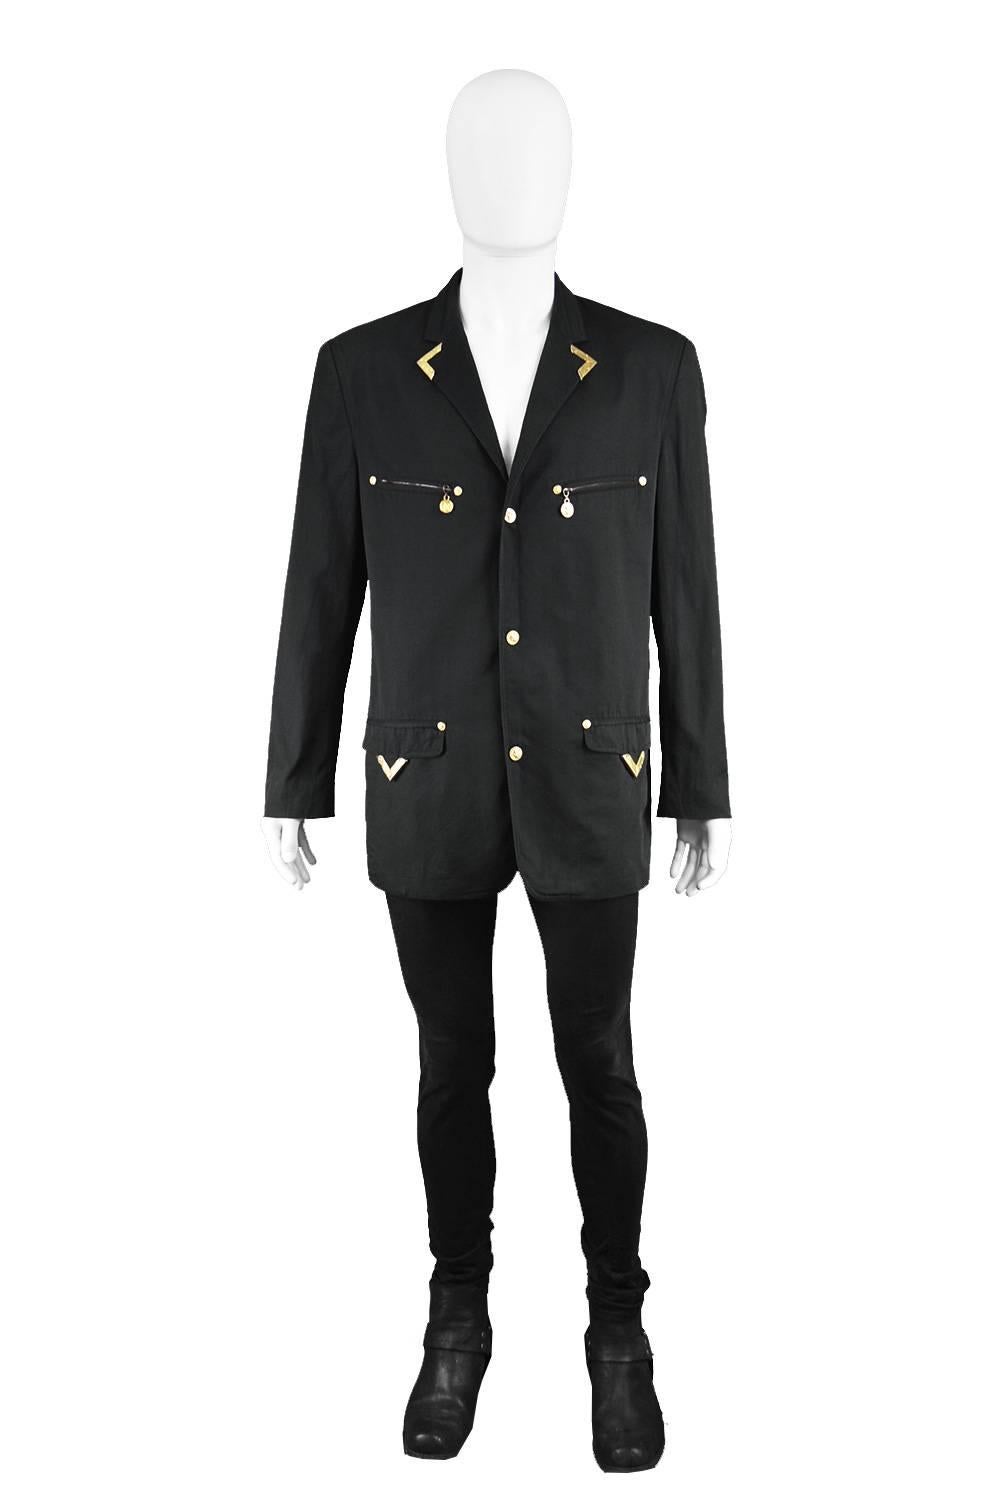 Gianni Versace Versus Vintage 1990's Men's Rare S & M Black & Gold Cotton Blazer

Size: Marked 50 which is roughly a men's Medium to Large. Please check measurements. 
Chest - 44” / 112cm (allow a couple of inches room for movement)
Waist - 40” /